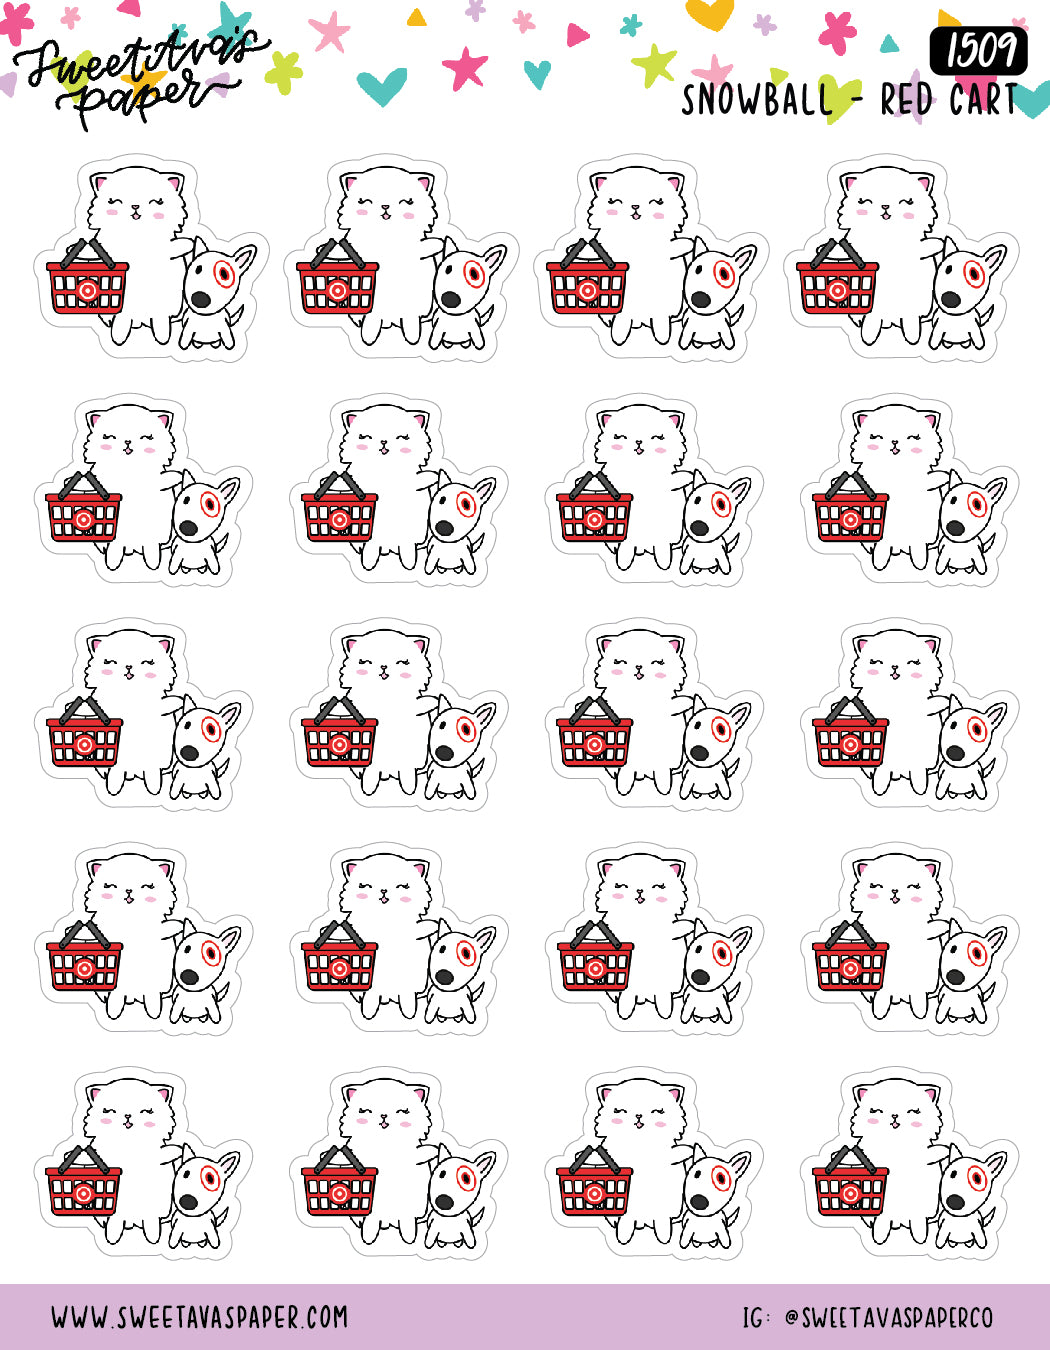 Red Cart Shopping Planner Stickers - Snowball The Cat [1509]